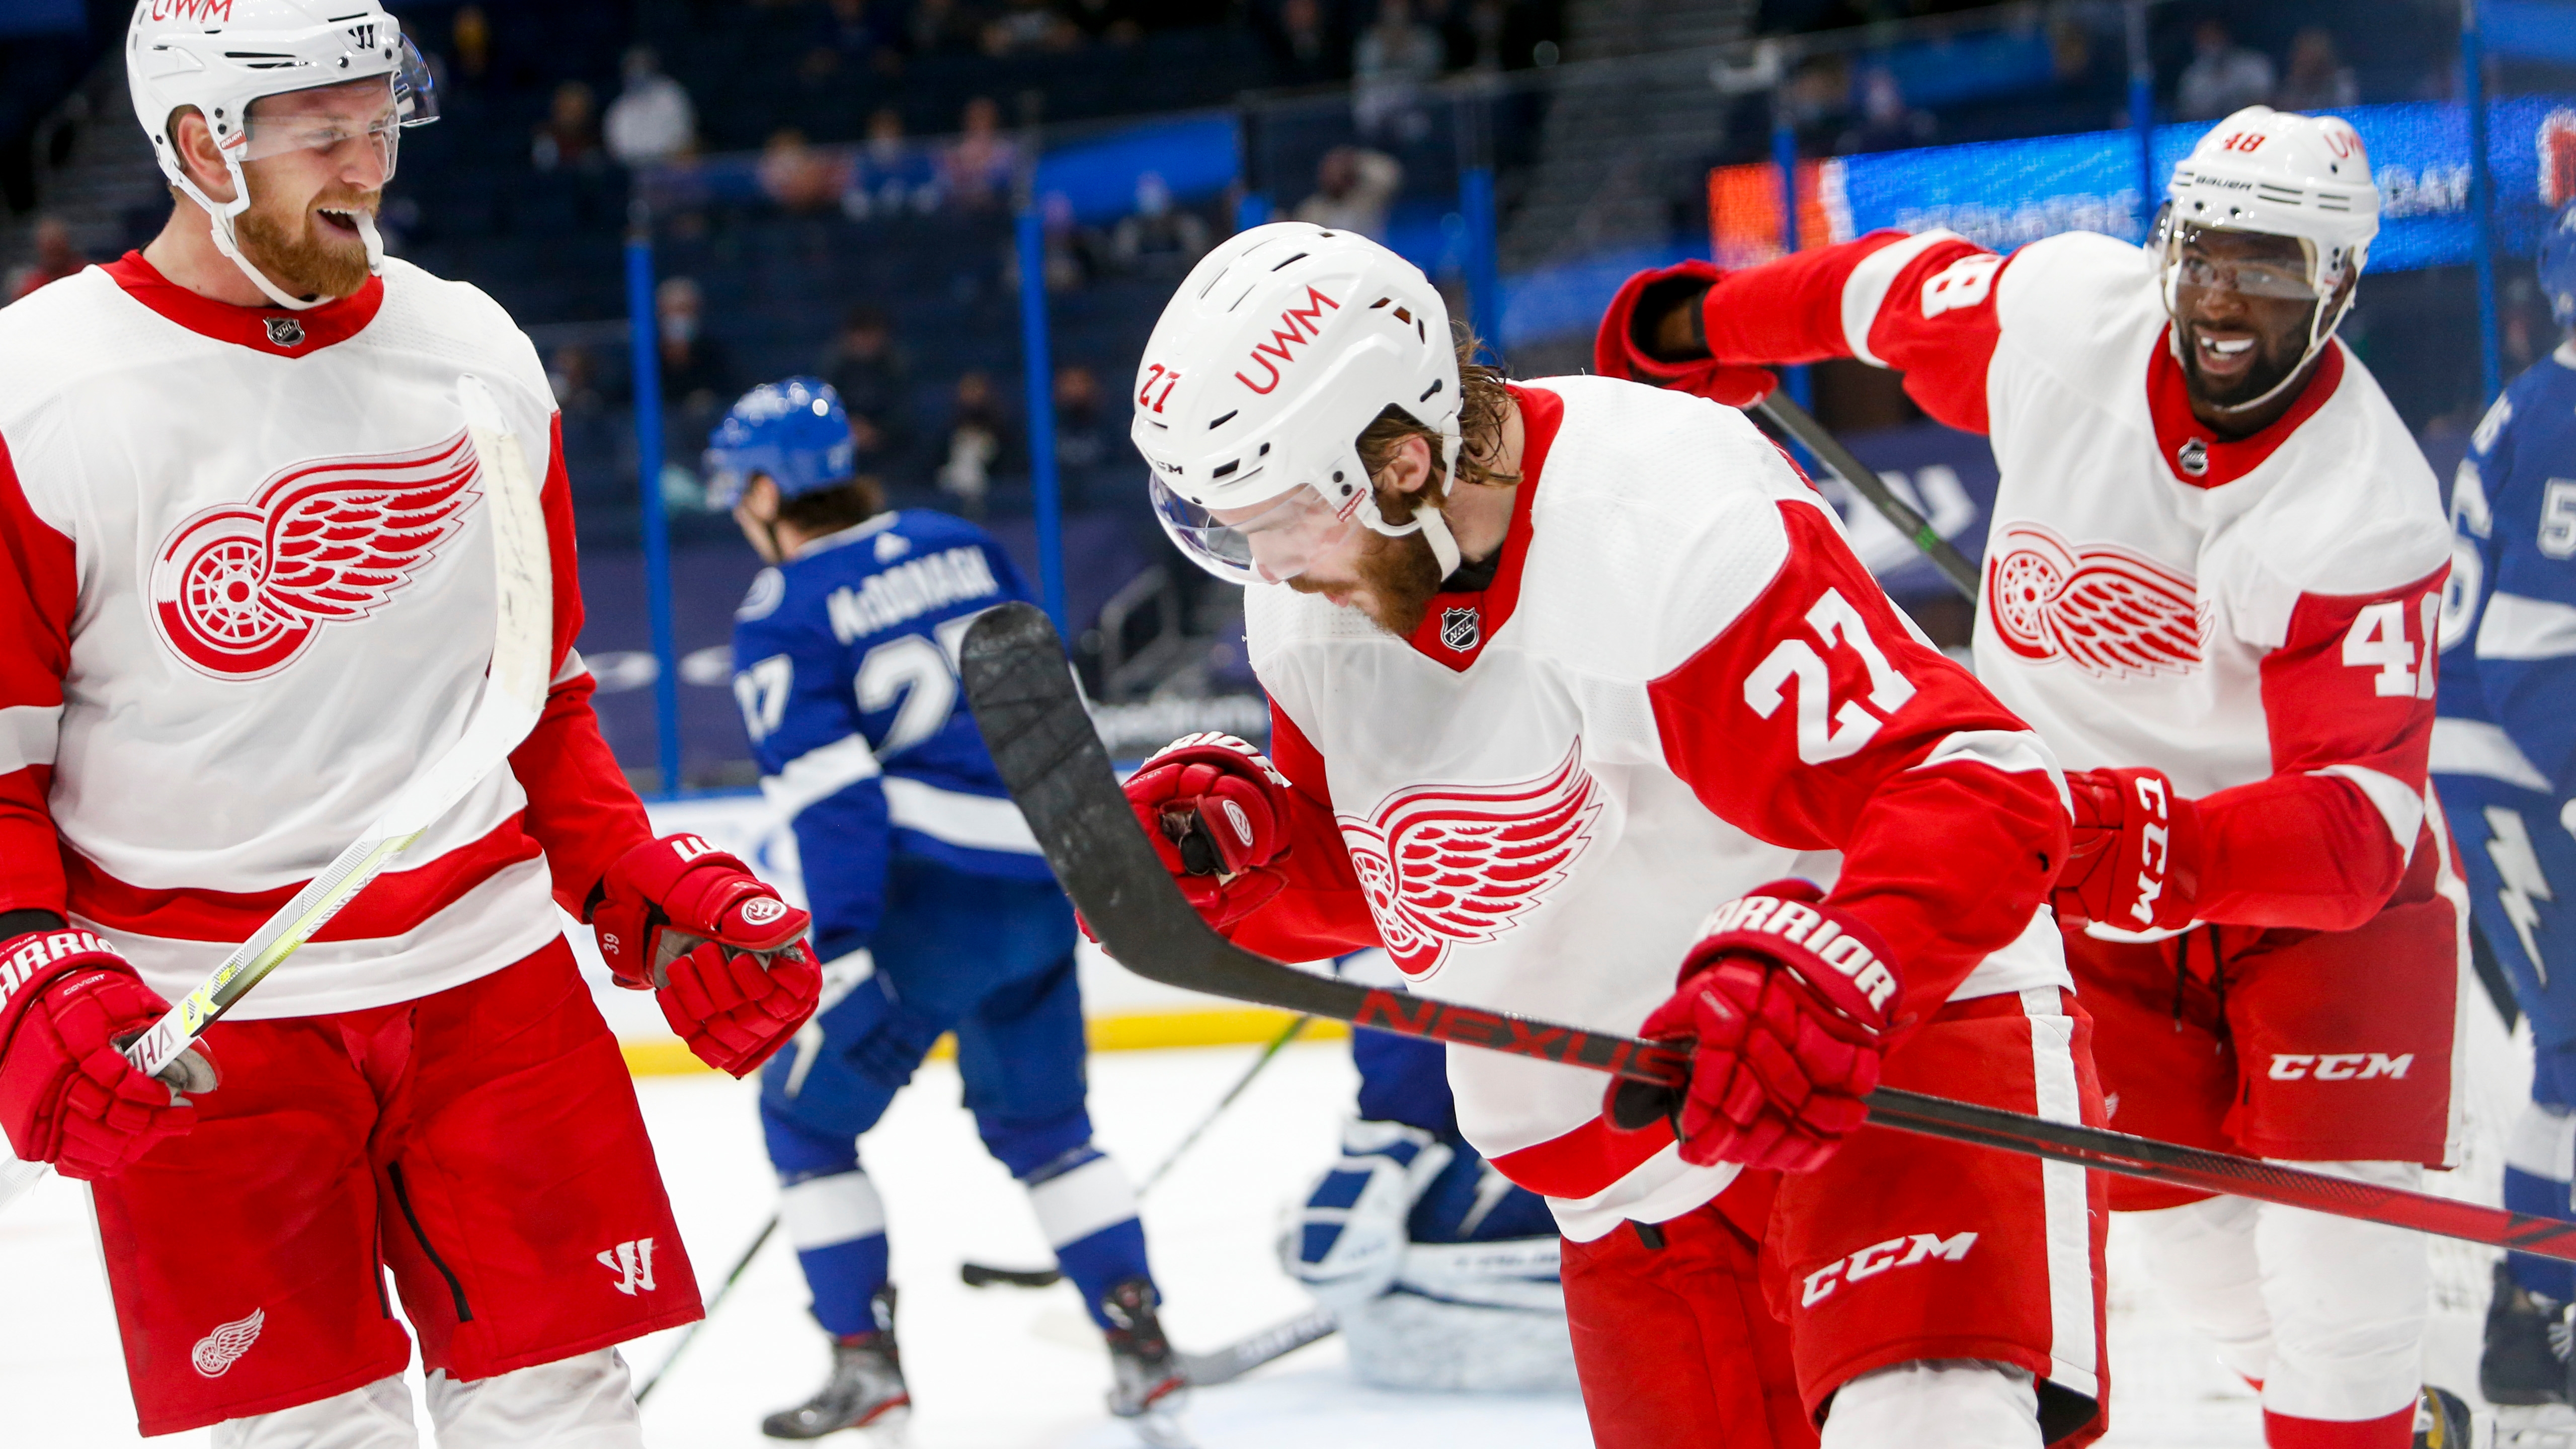 Givani Smith #48 (Detroit Red Wings) first NHL goal Jan 14, 2020